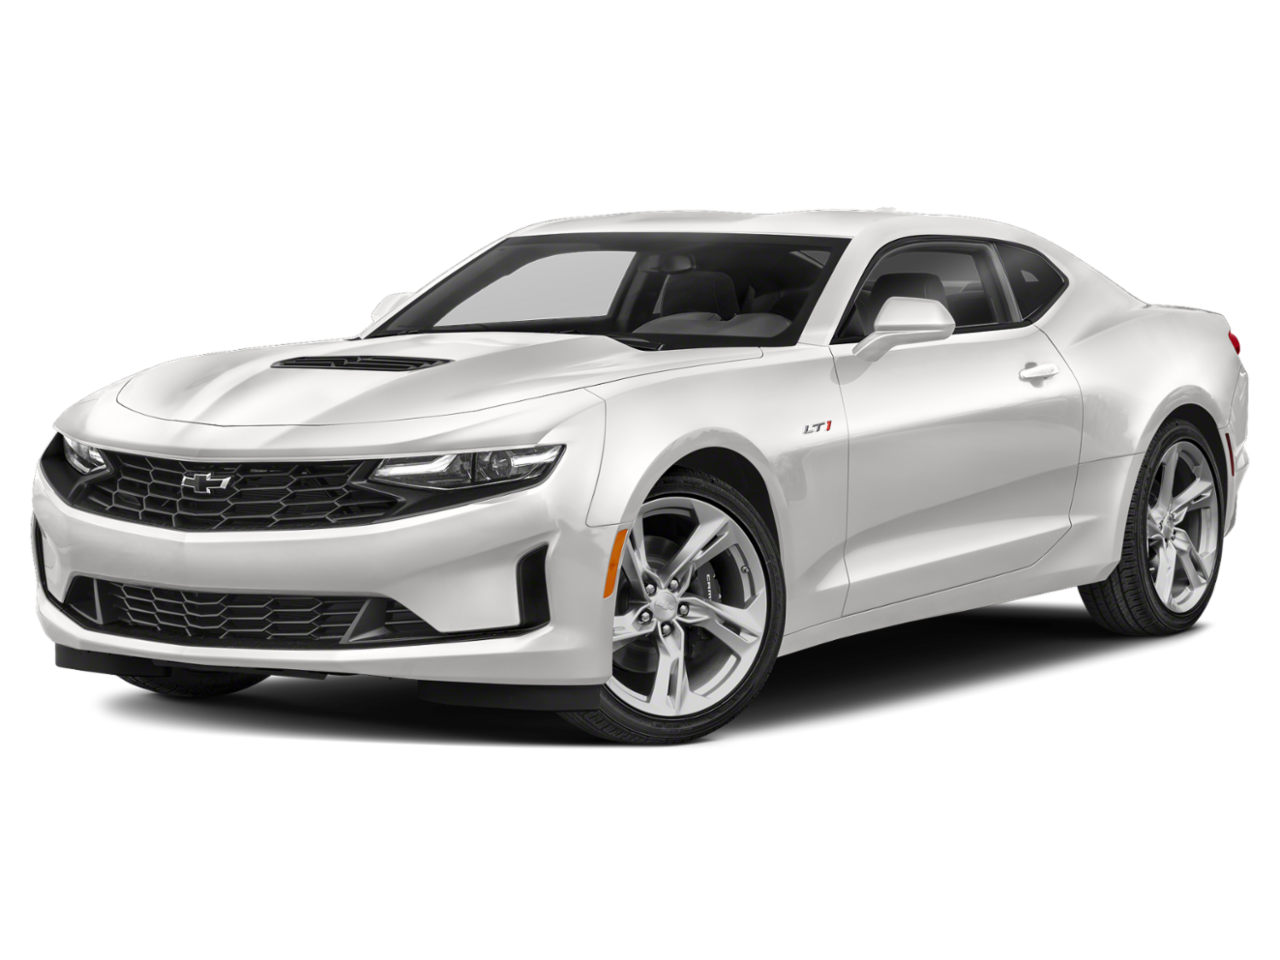 New Chevrolet Camaro at Webb Auto Group Serving Chicago and Northwest